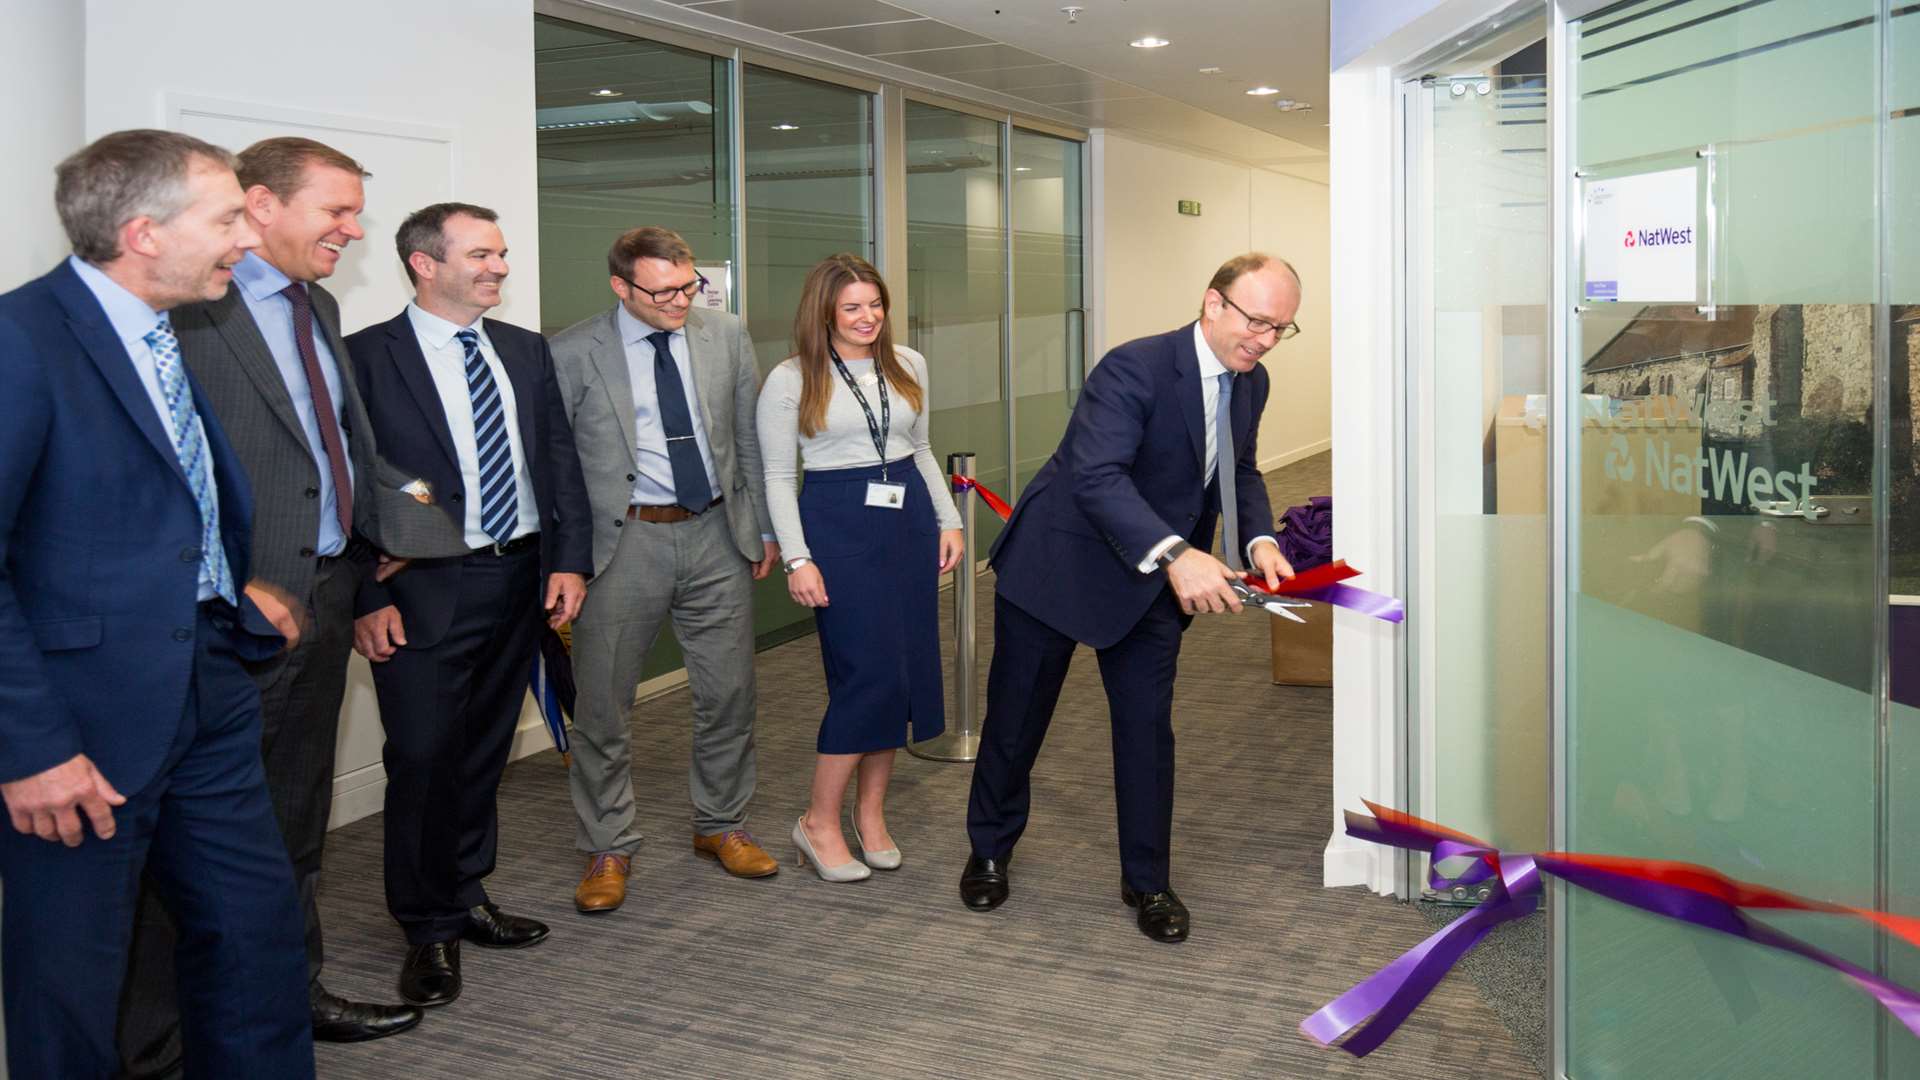 Natwest has become the first bank to open an office in Discovery Park, Sandwich